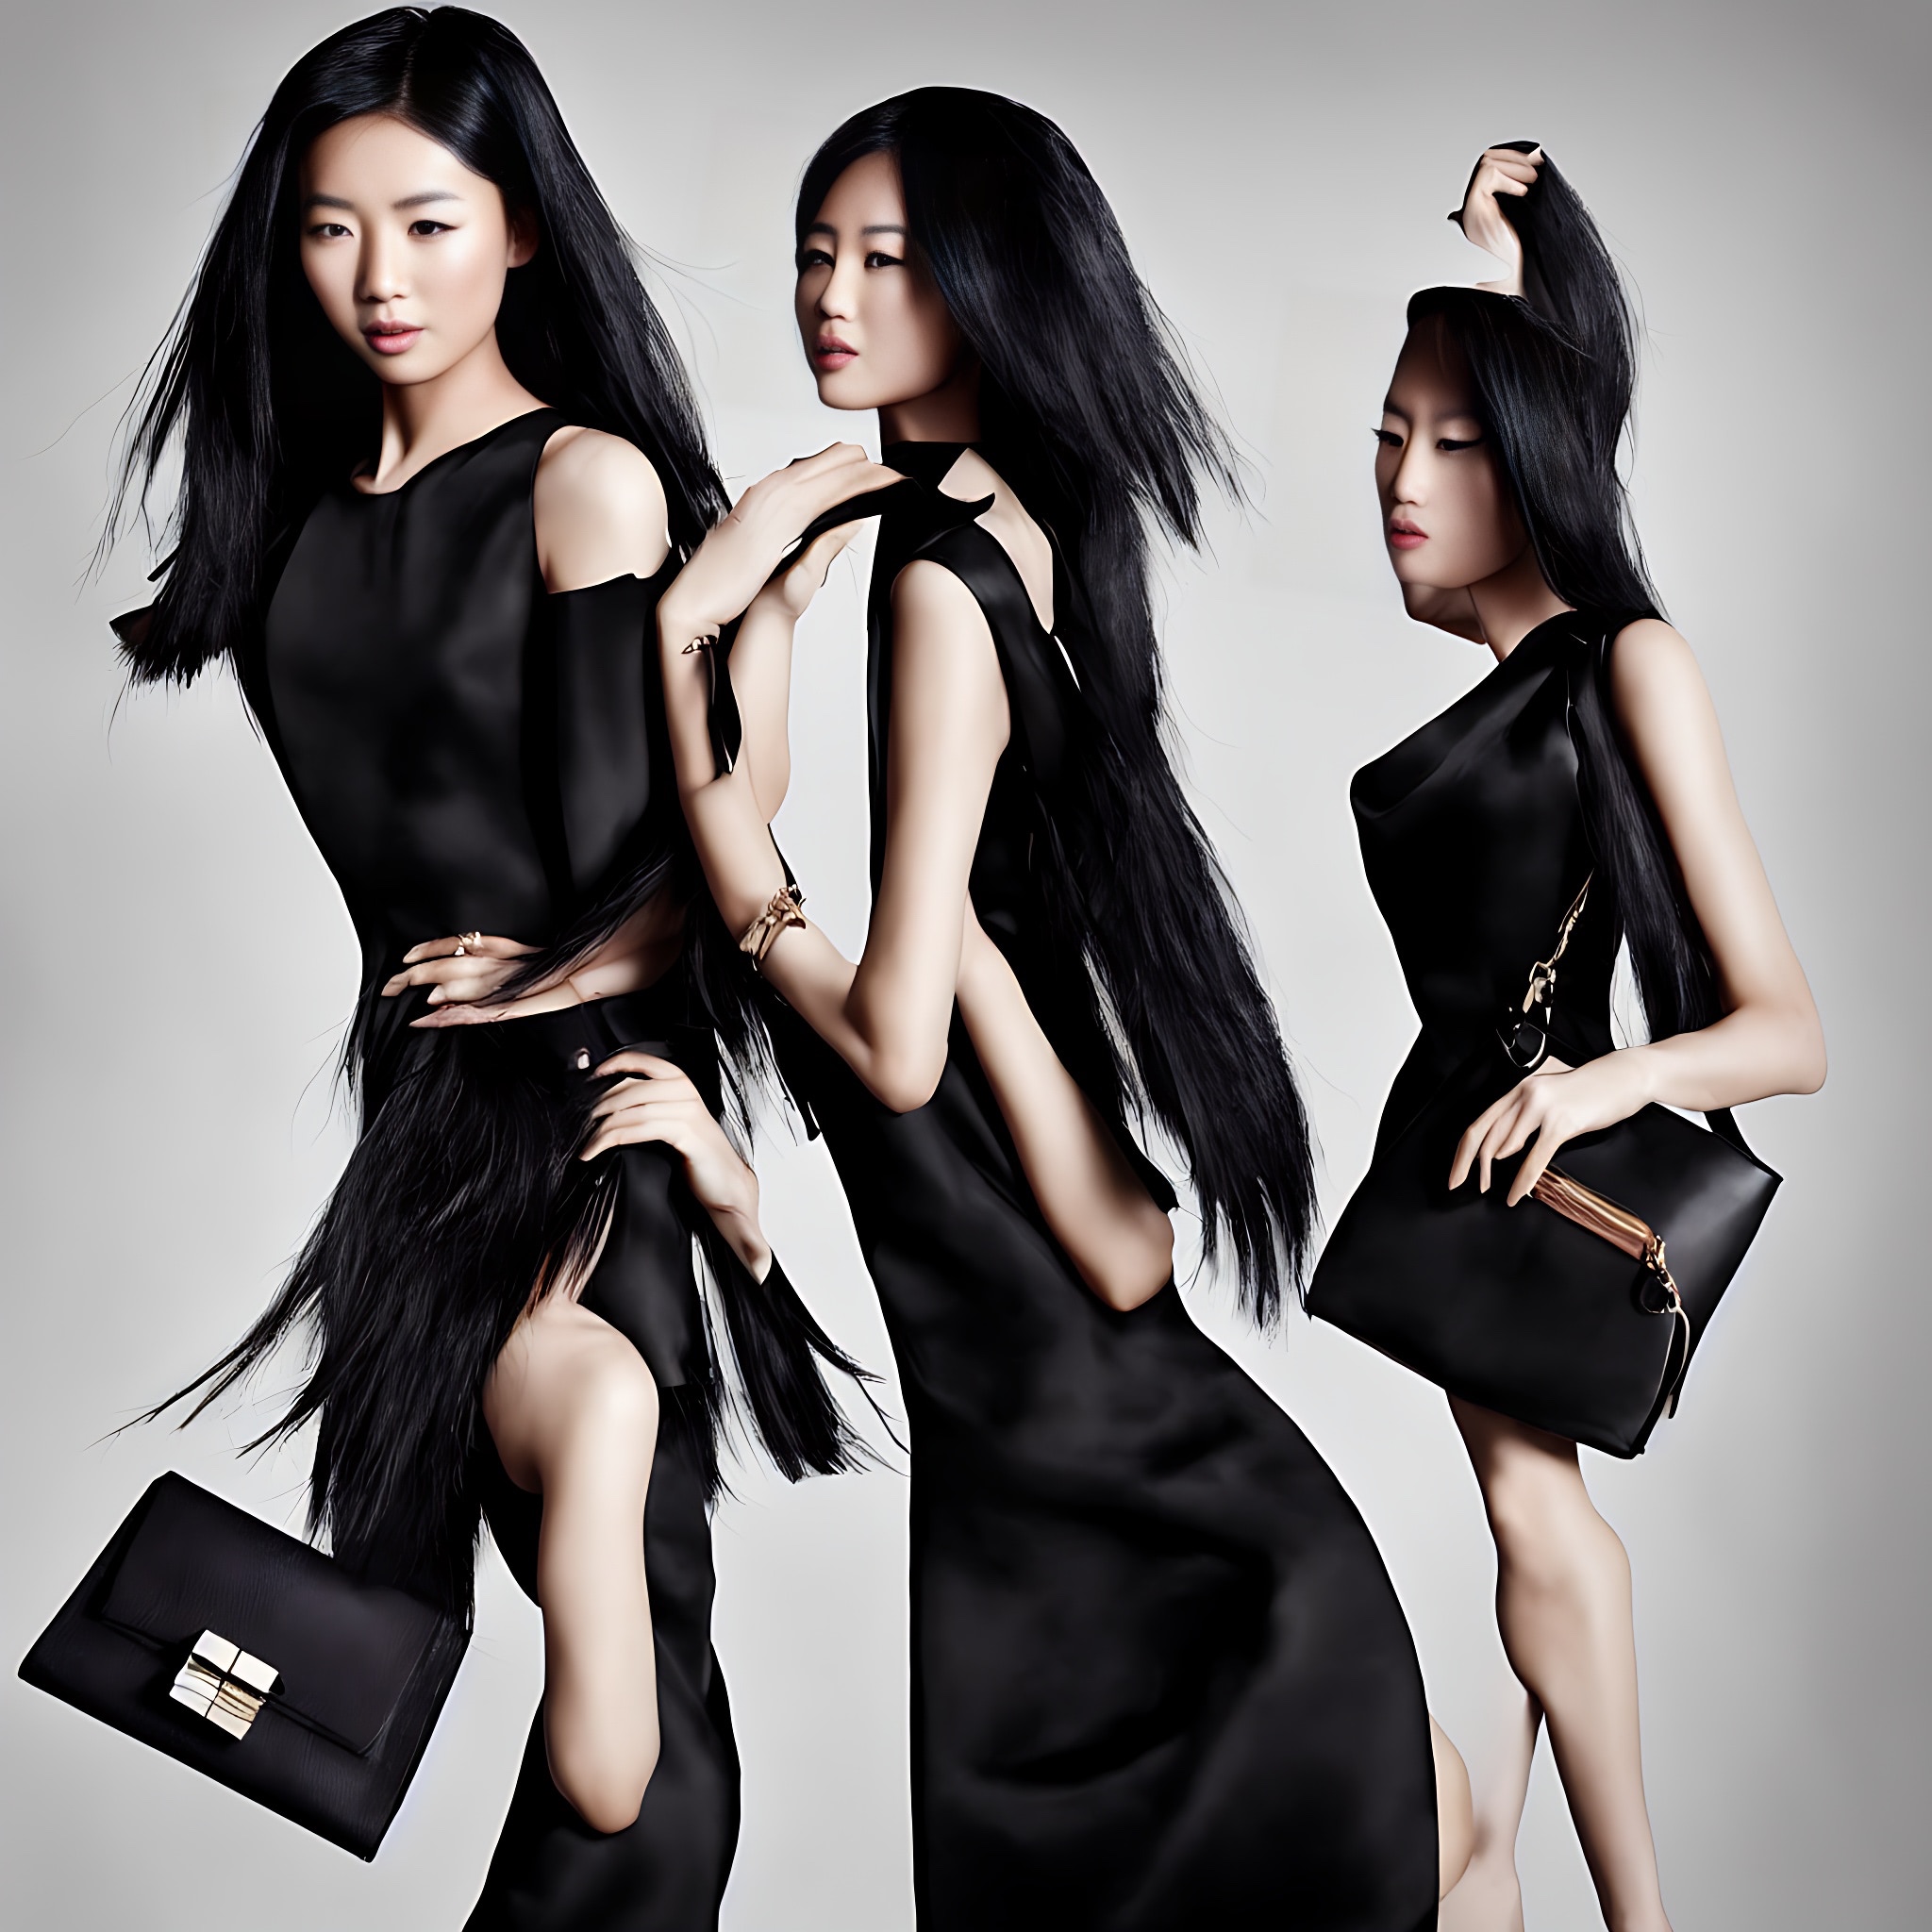 asian-fashion-advertisement-in-the-2090s-2